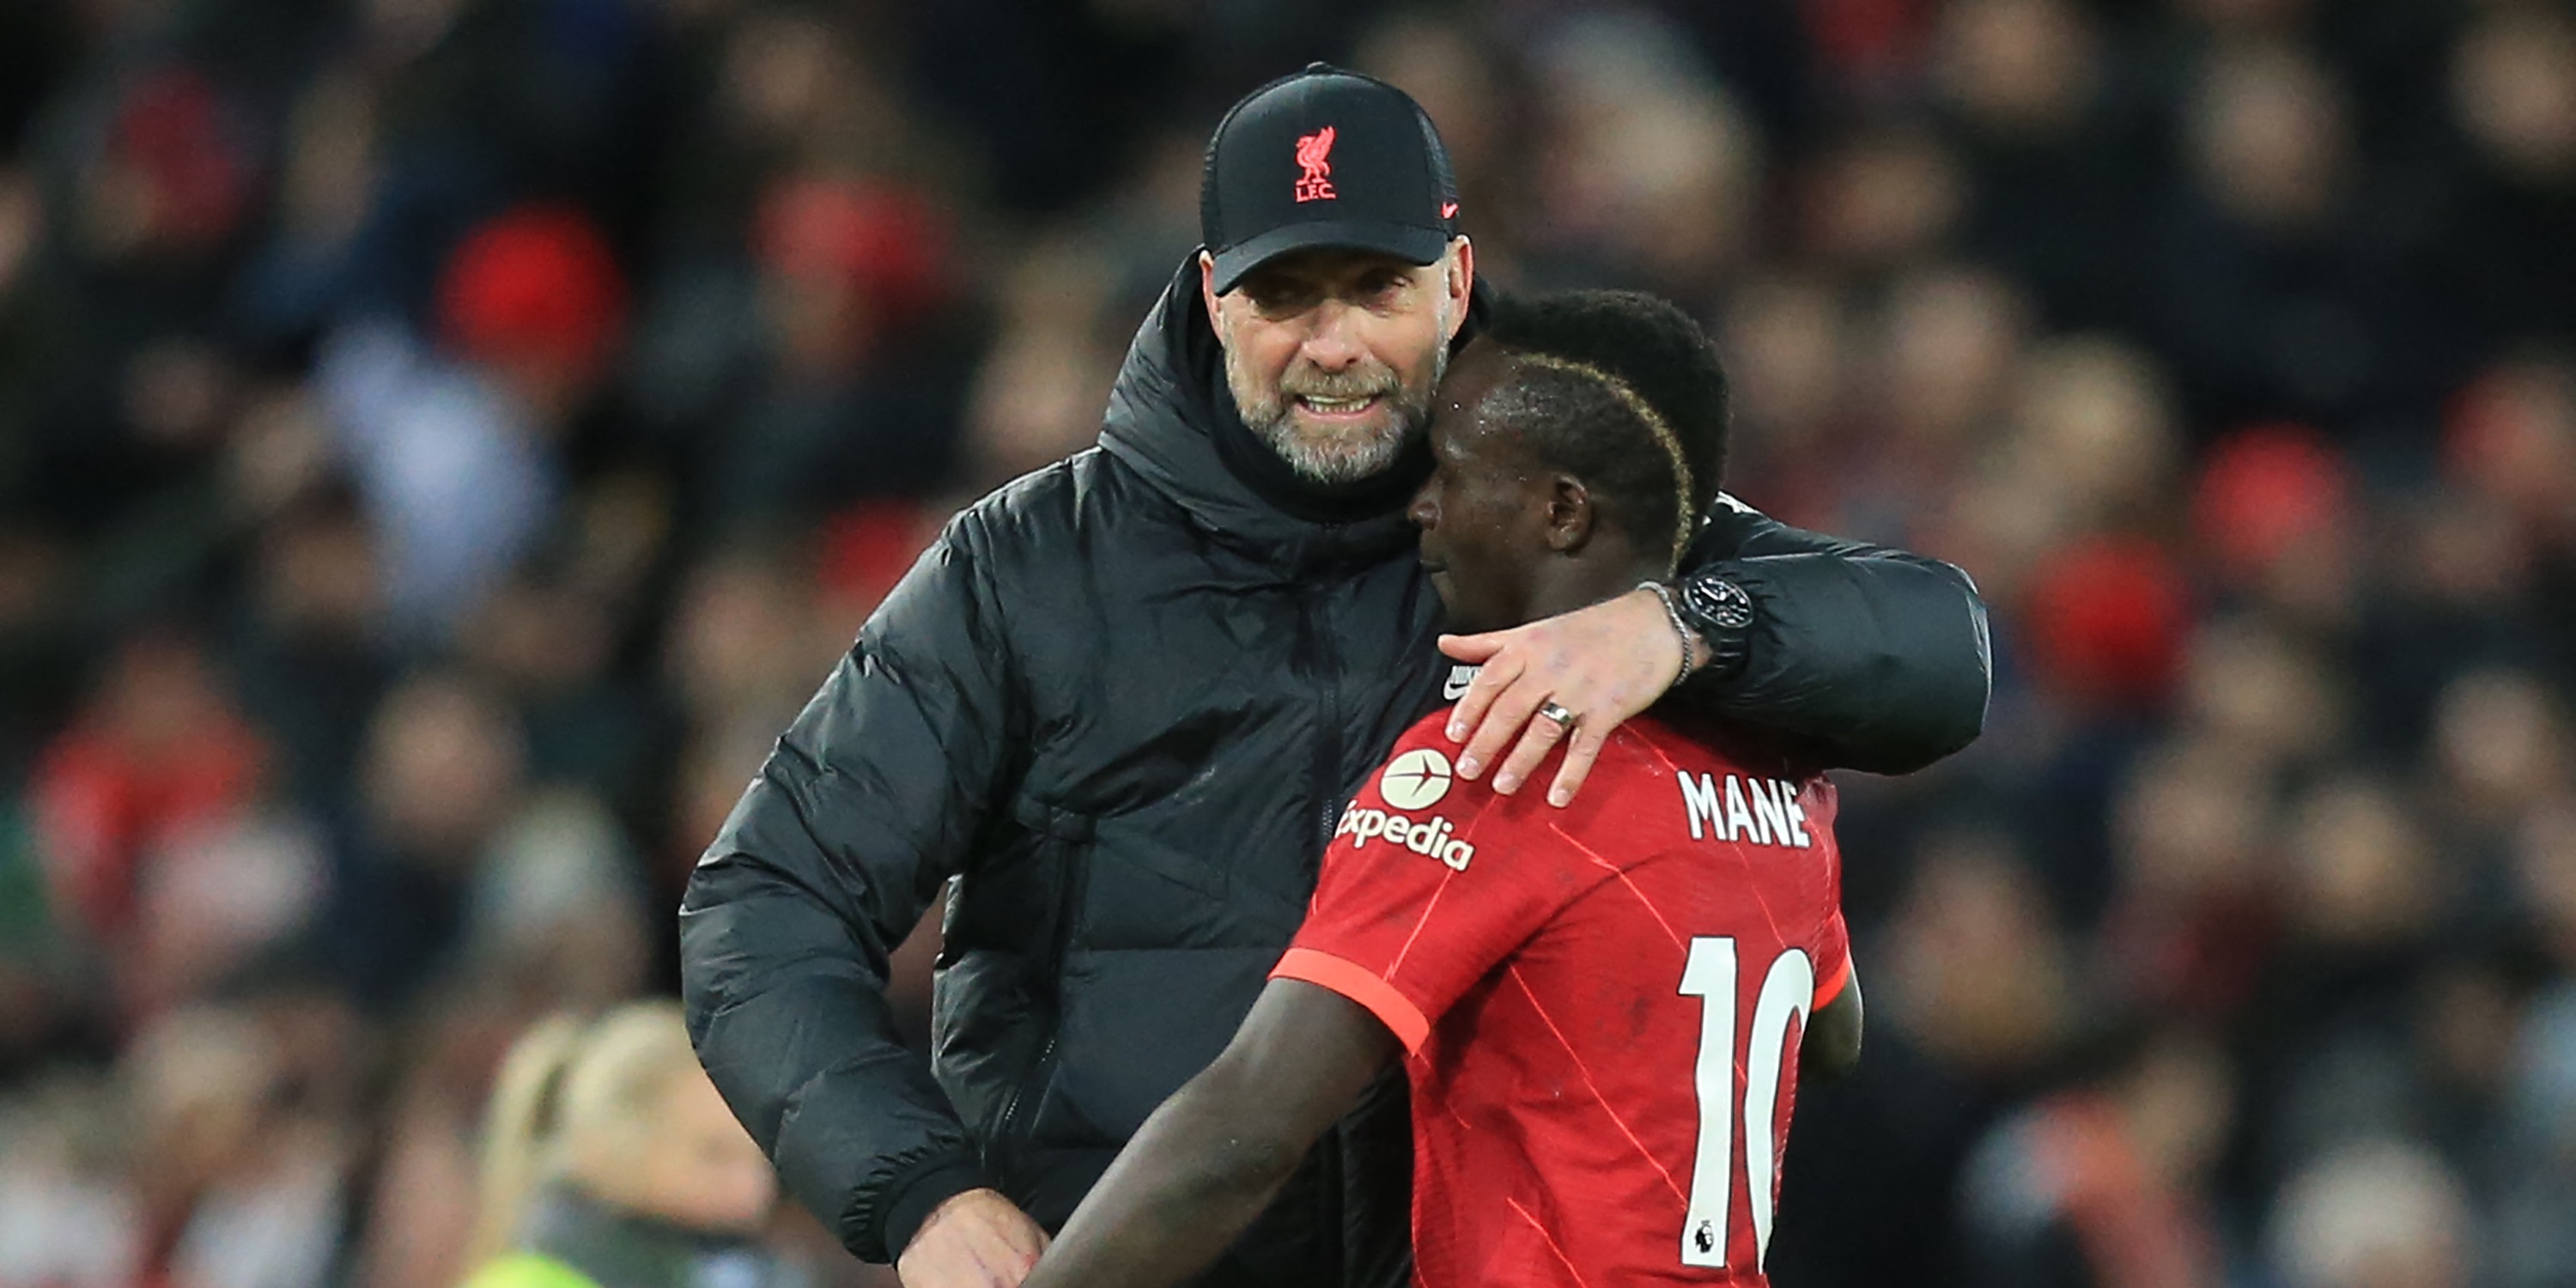 ‘I don’t think he could play on after that’ – Pundit offers three bizarre reasons as to why he believes Sadio Mane left Liverpool this summer